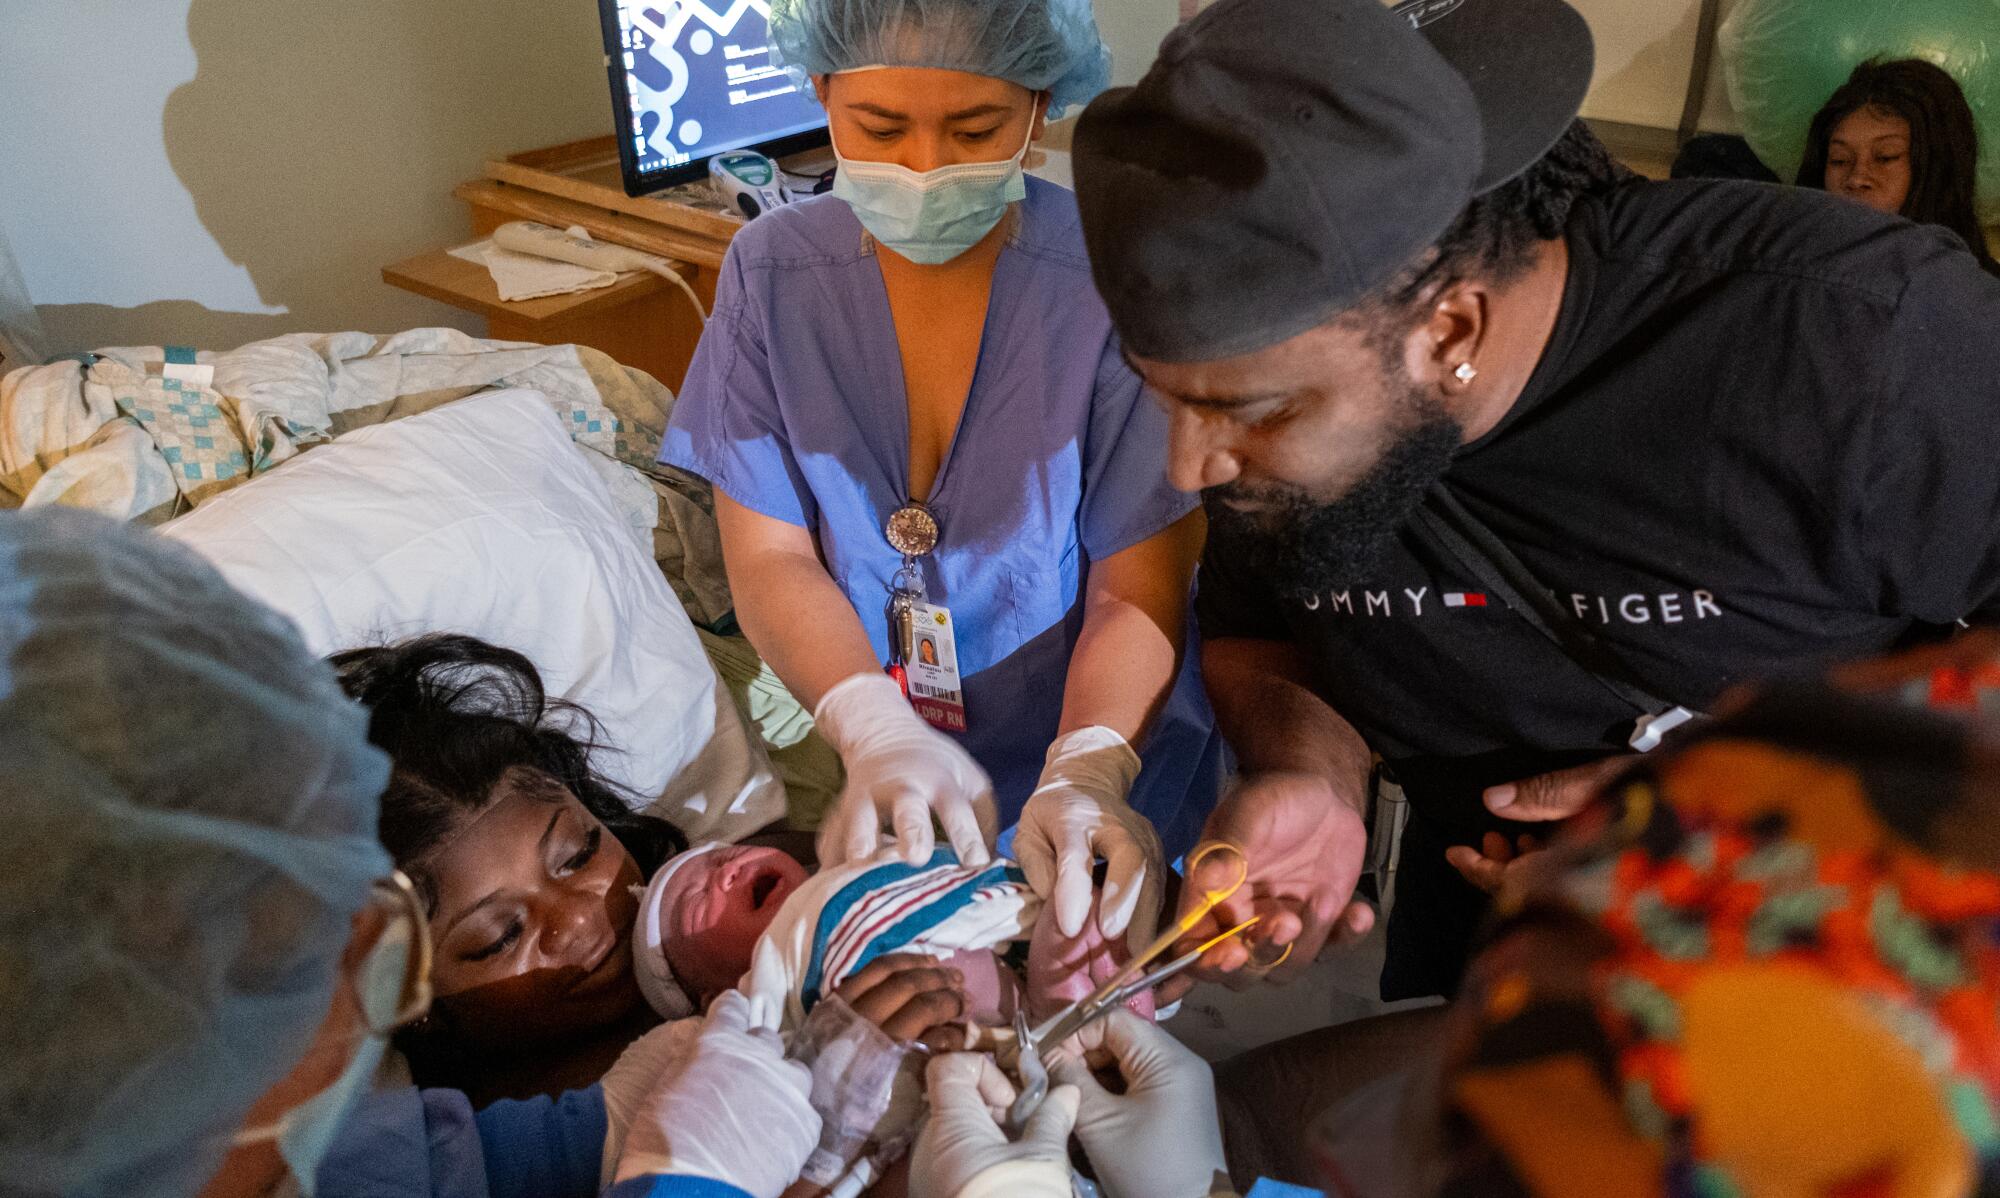 A man cuts the umbilical cord of his child as the mother lies in her hospital bed flanked by nurses.